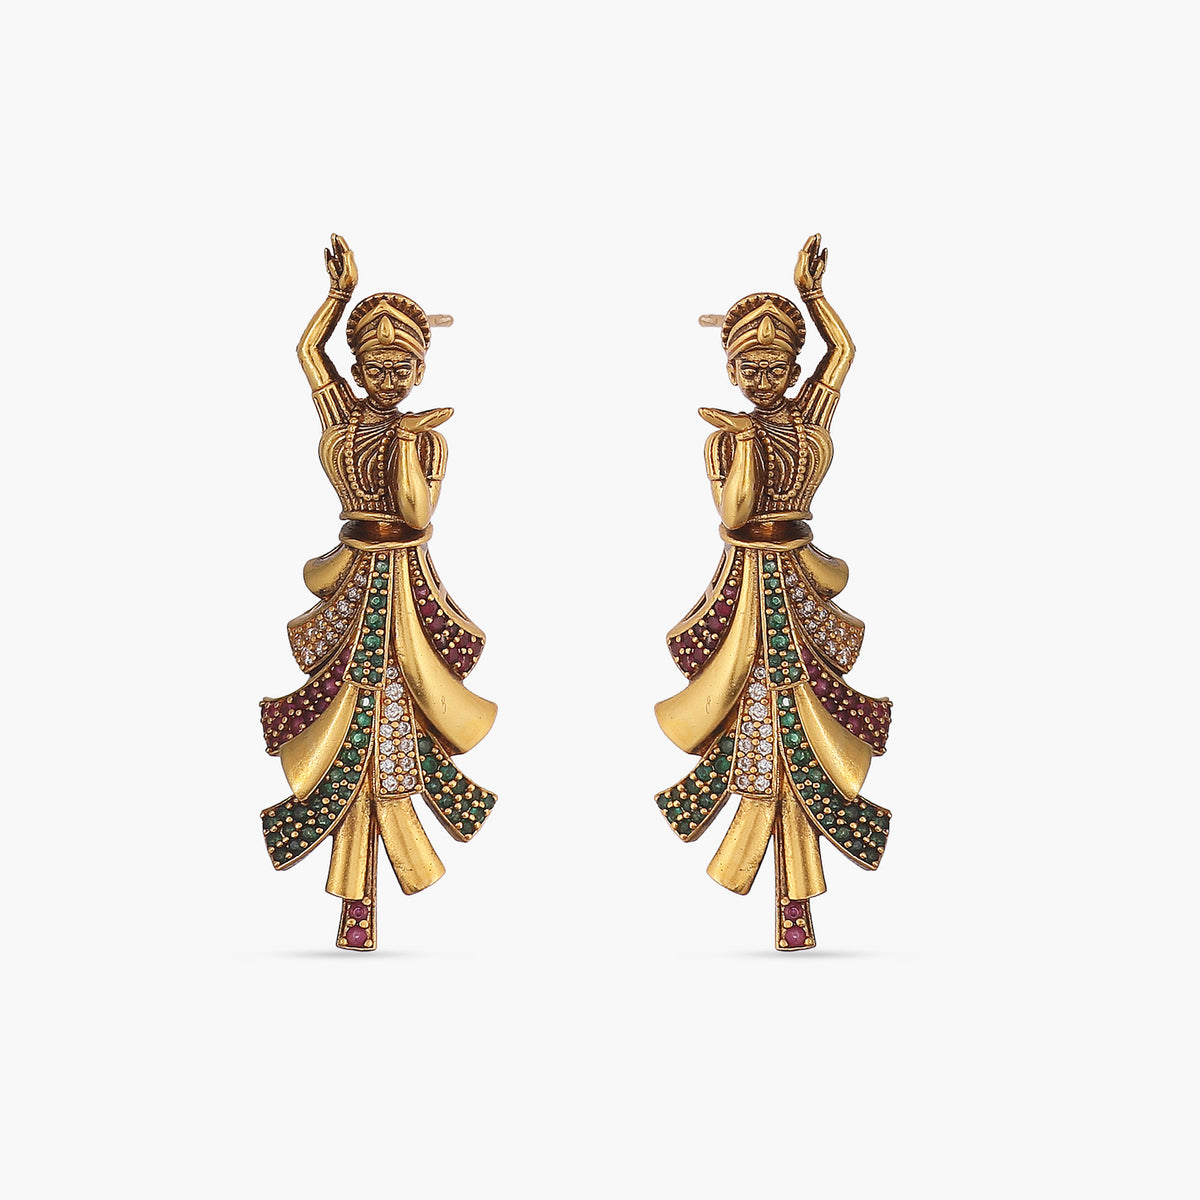 A picture of a pair of Indian artificial gold plated earrings with a dancing lady motif in a circular design and green gemstones.